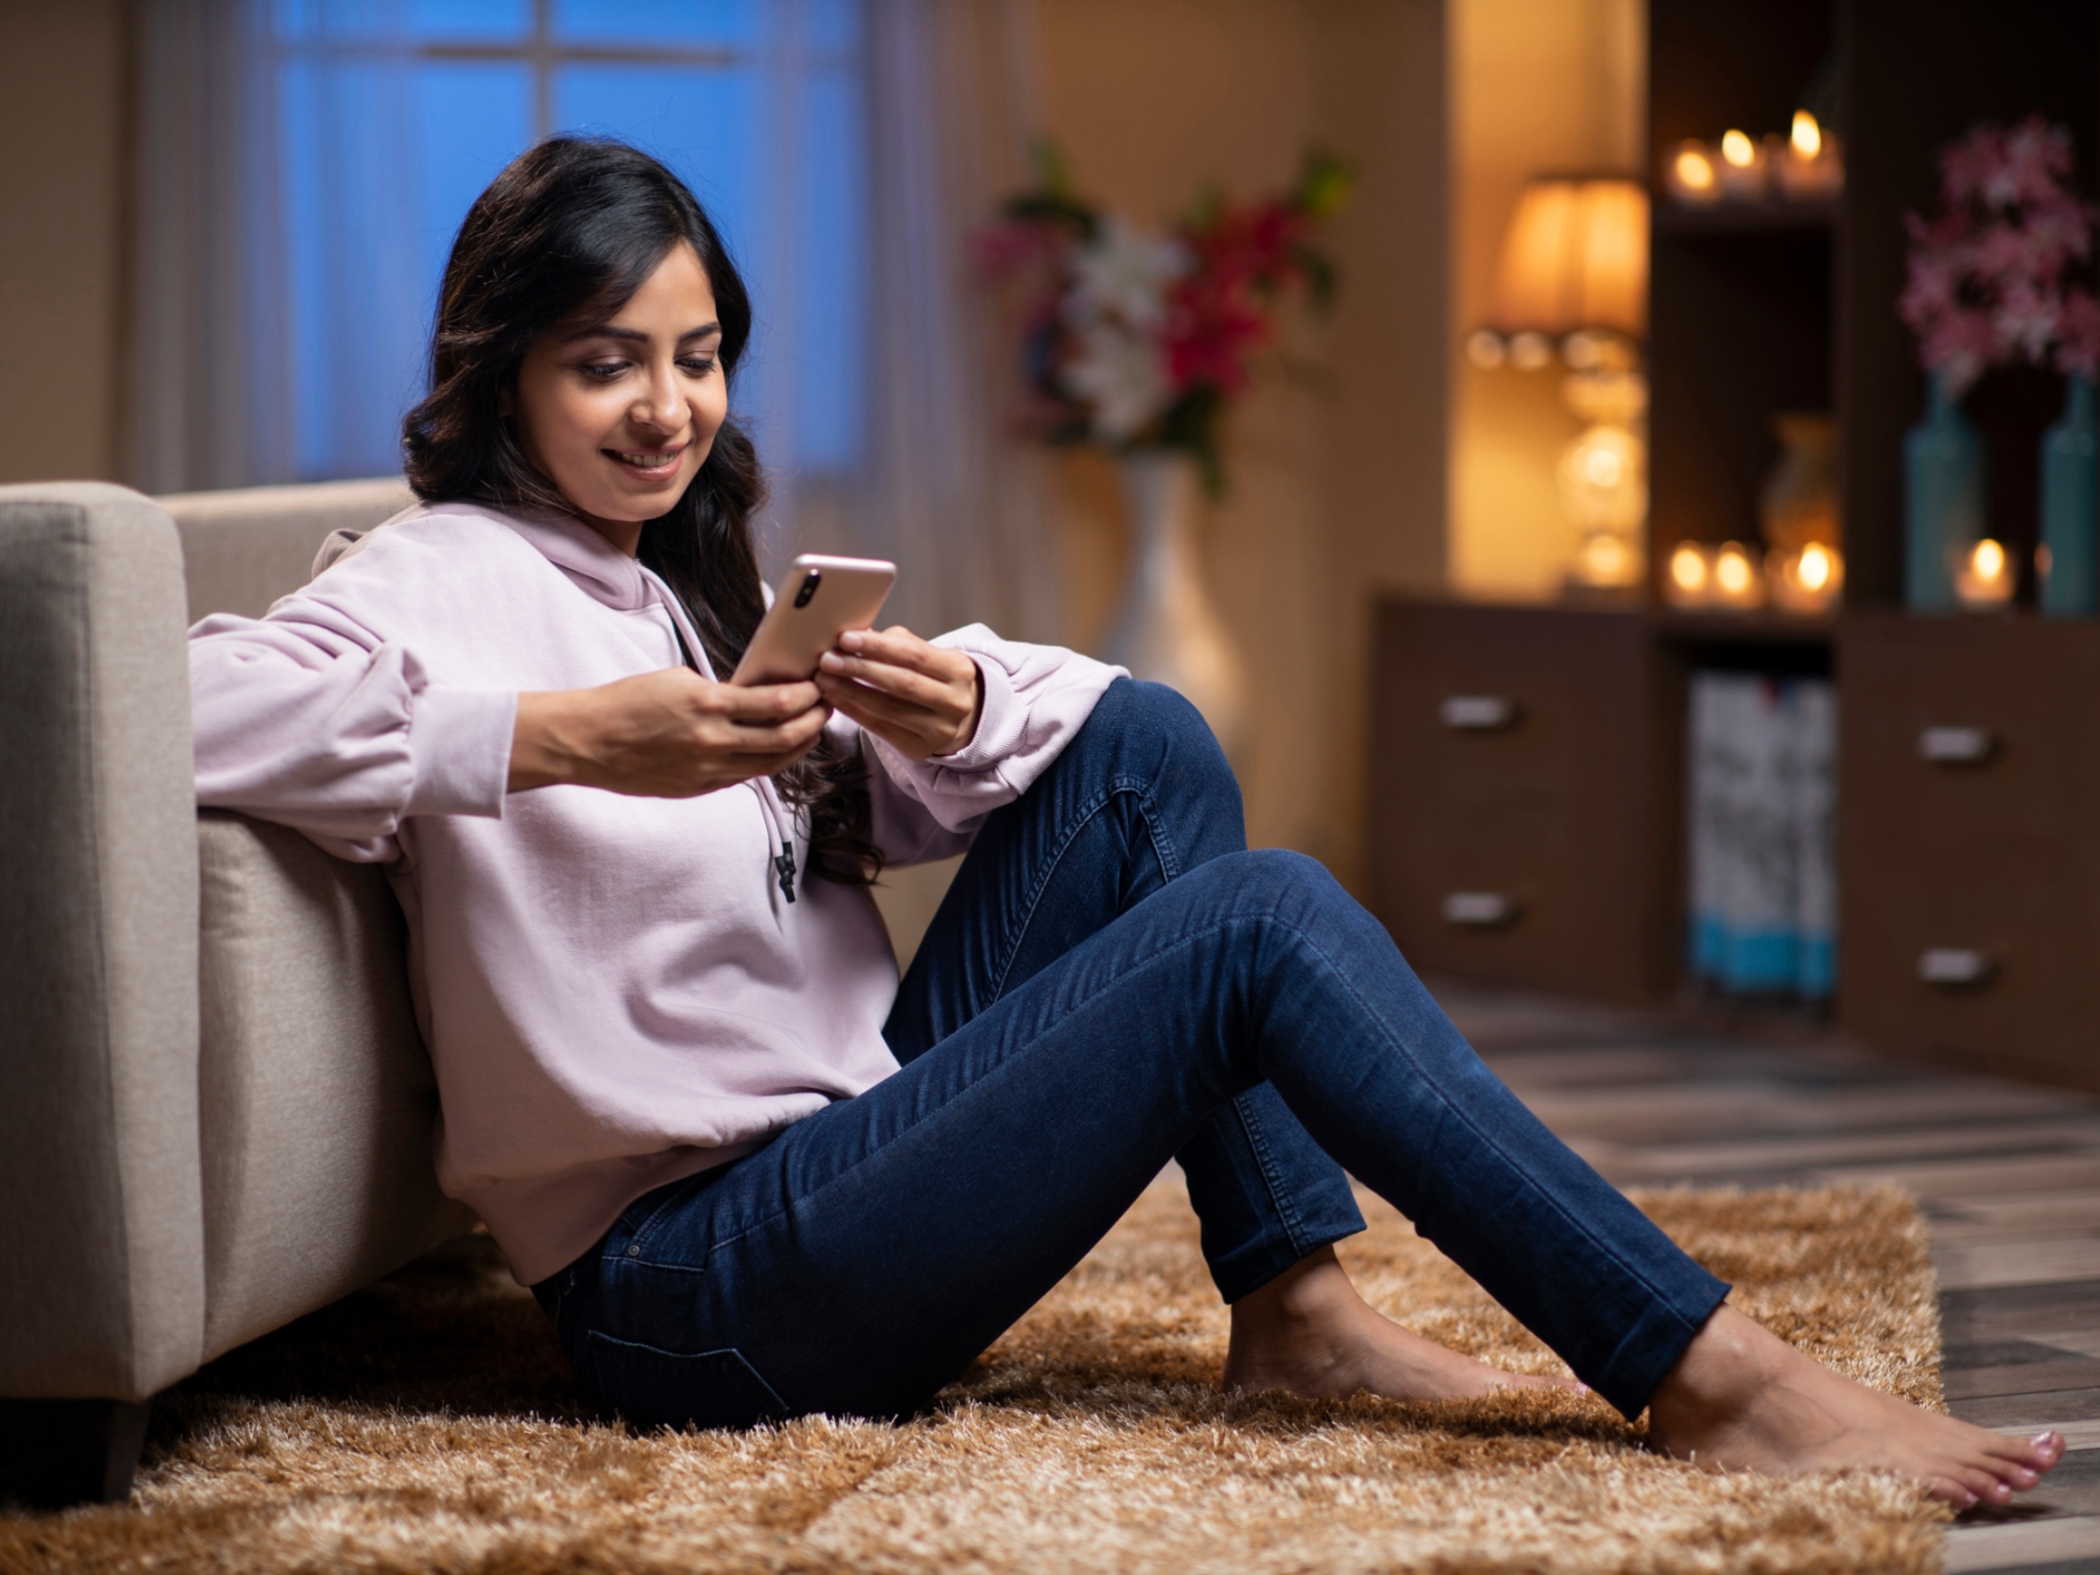 Woman at home in the evening using smartphone